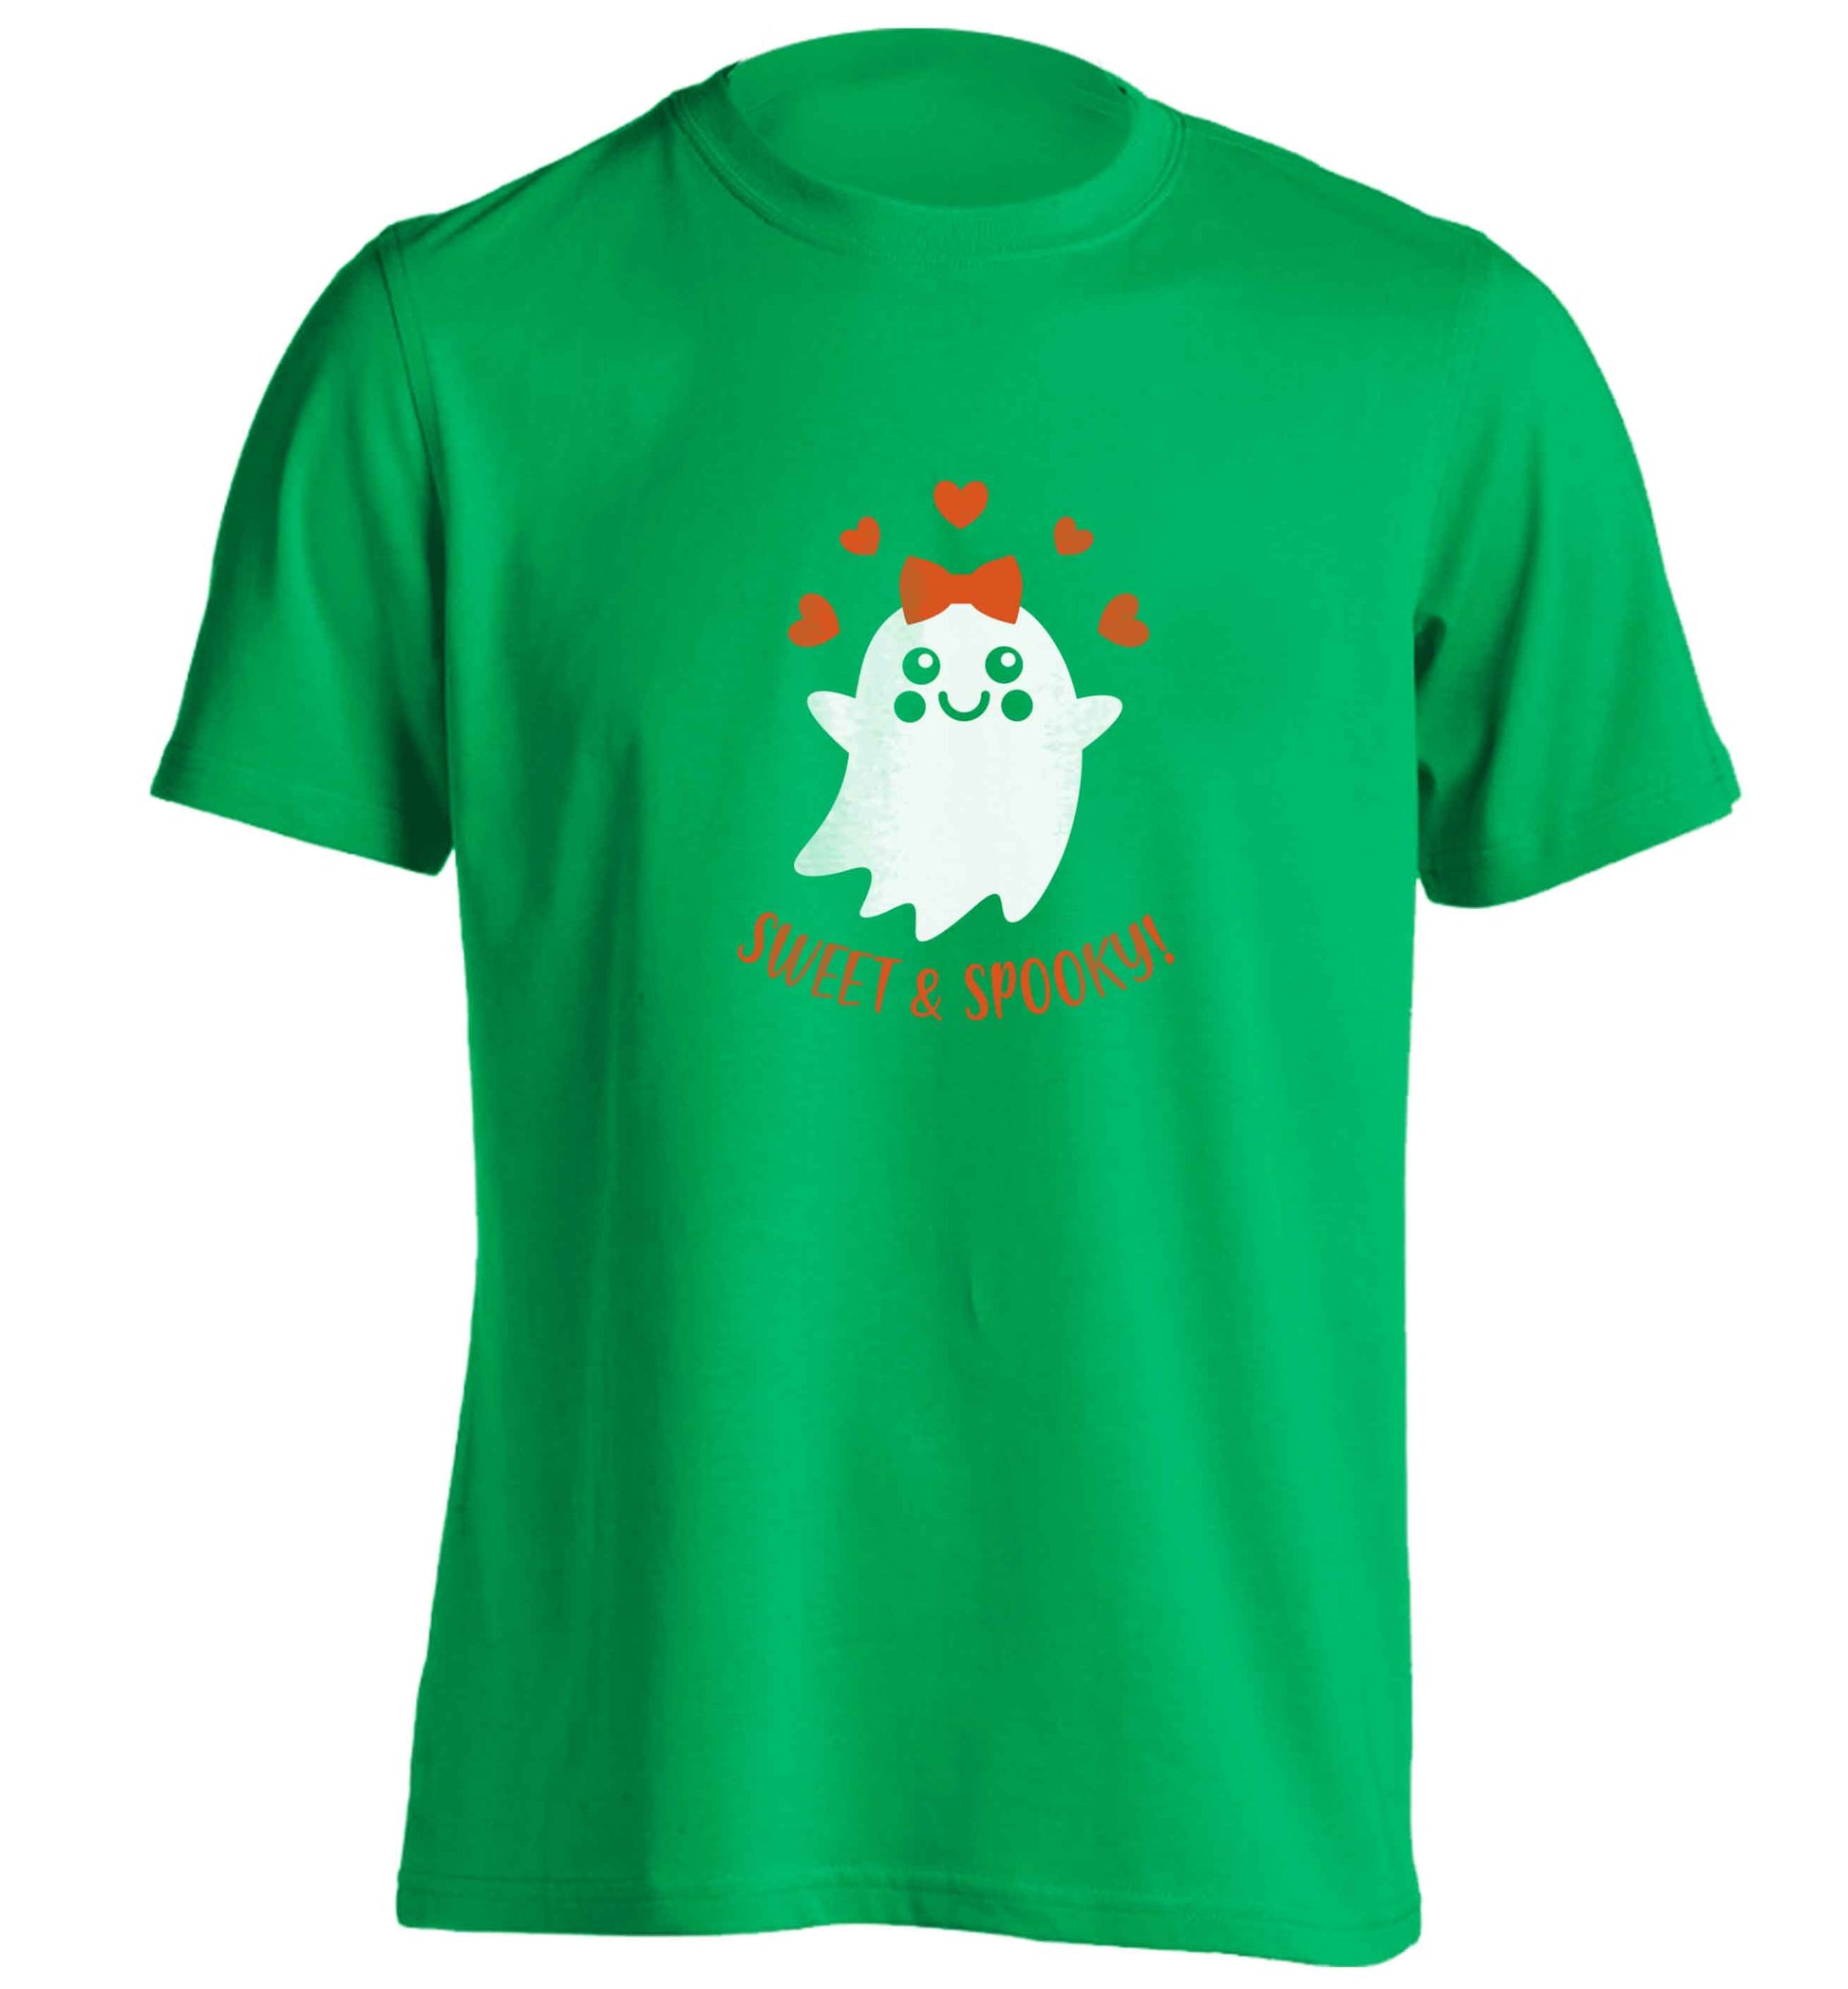 Sweet and spooky adults unisex green Tshirt 2XL